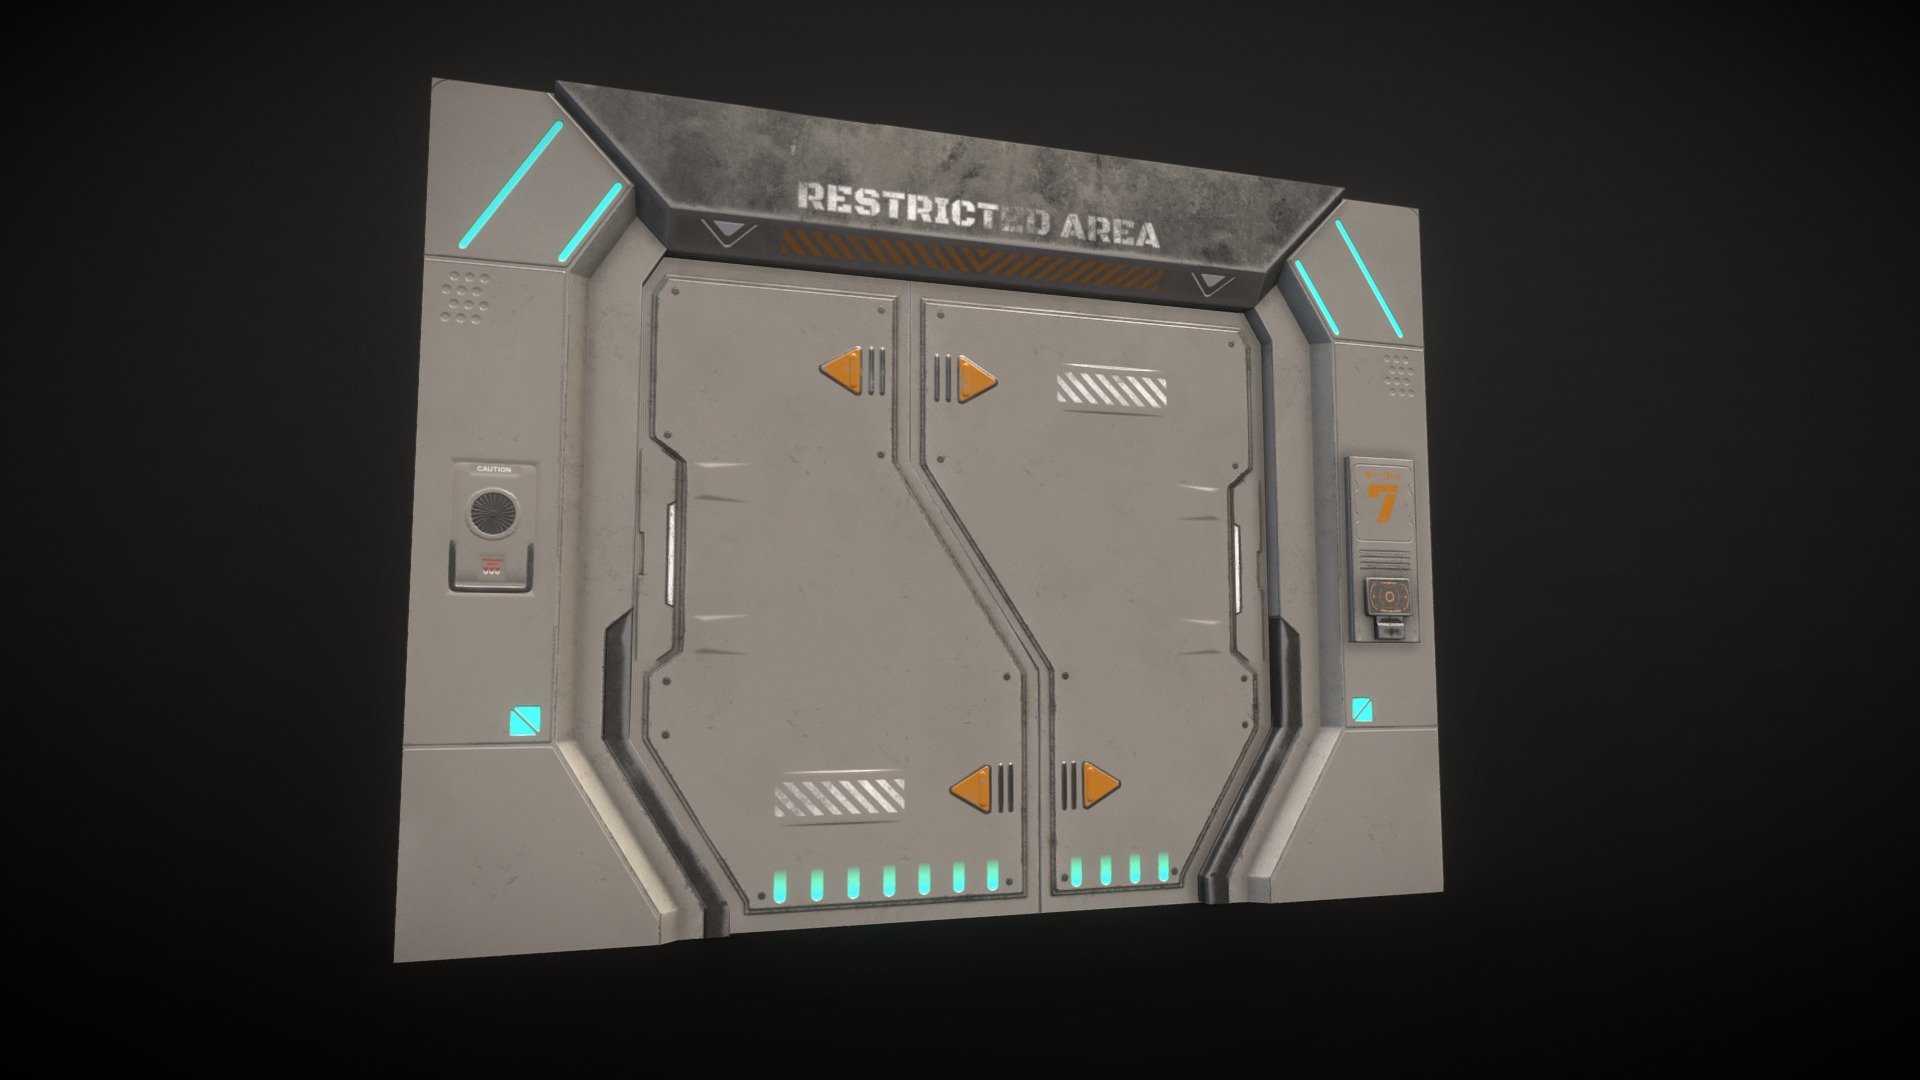 SciFi Low Poly Door with PBR textures:




Created with 3ds Max.

Textured in Substance Painter.

The unit of measurement used for the model is centimeters.

PBR Material qith 4k textures including: Albedo, Normal, Metalness, Roughness, Occlusion, Emissive.

Doors in separated objects, ready to animate.

Total Polys: 186 (352 tris).  

Mesh is open on the sides, it is intended to be integrated in the wall (totally compatible with my Sci-Fi Modular Corridor)  

Formats included: MAX / BLEND / FBX / OBJ / 3DS  

Model also available with &ldquo;SciFi Modular Corridor Version 2